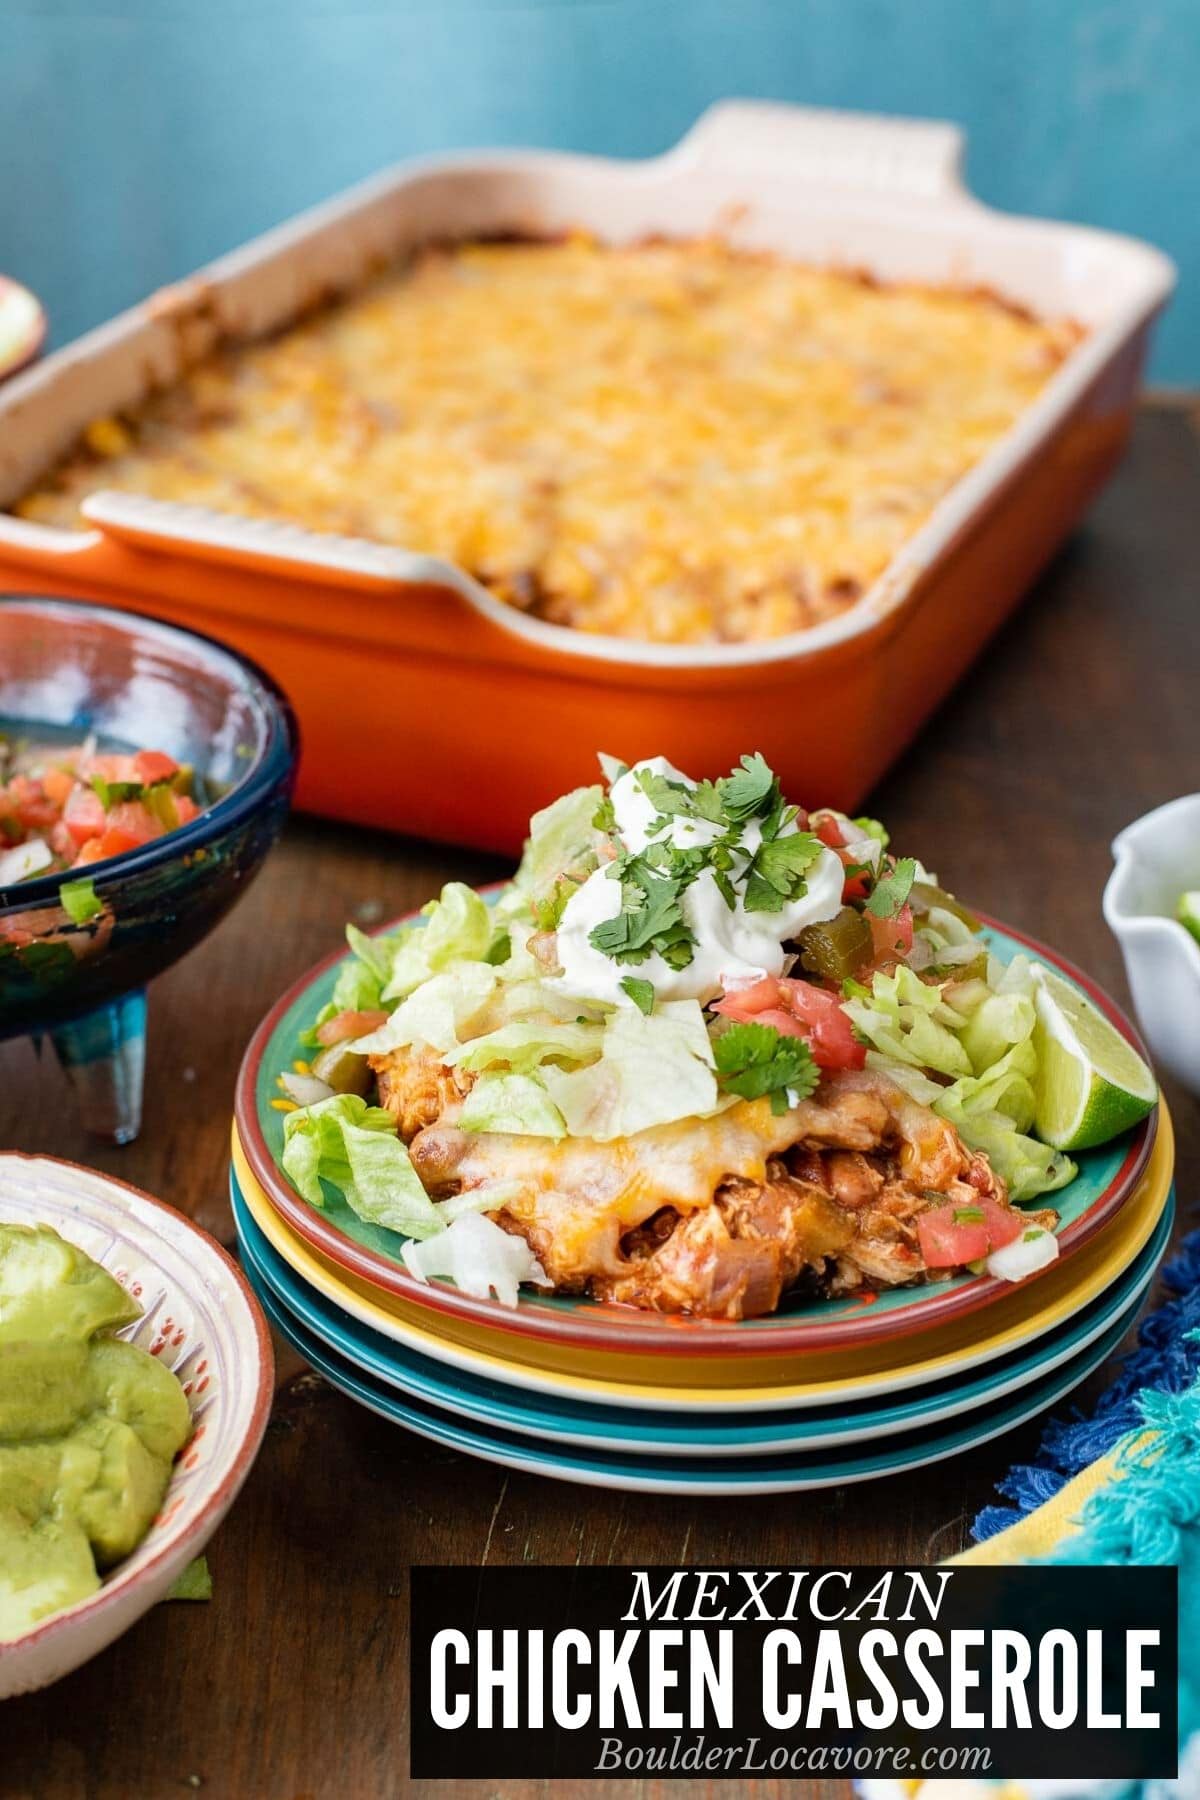 MEXICAN CHICKEN on plate with CASSEROLE TITLE